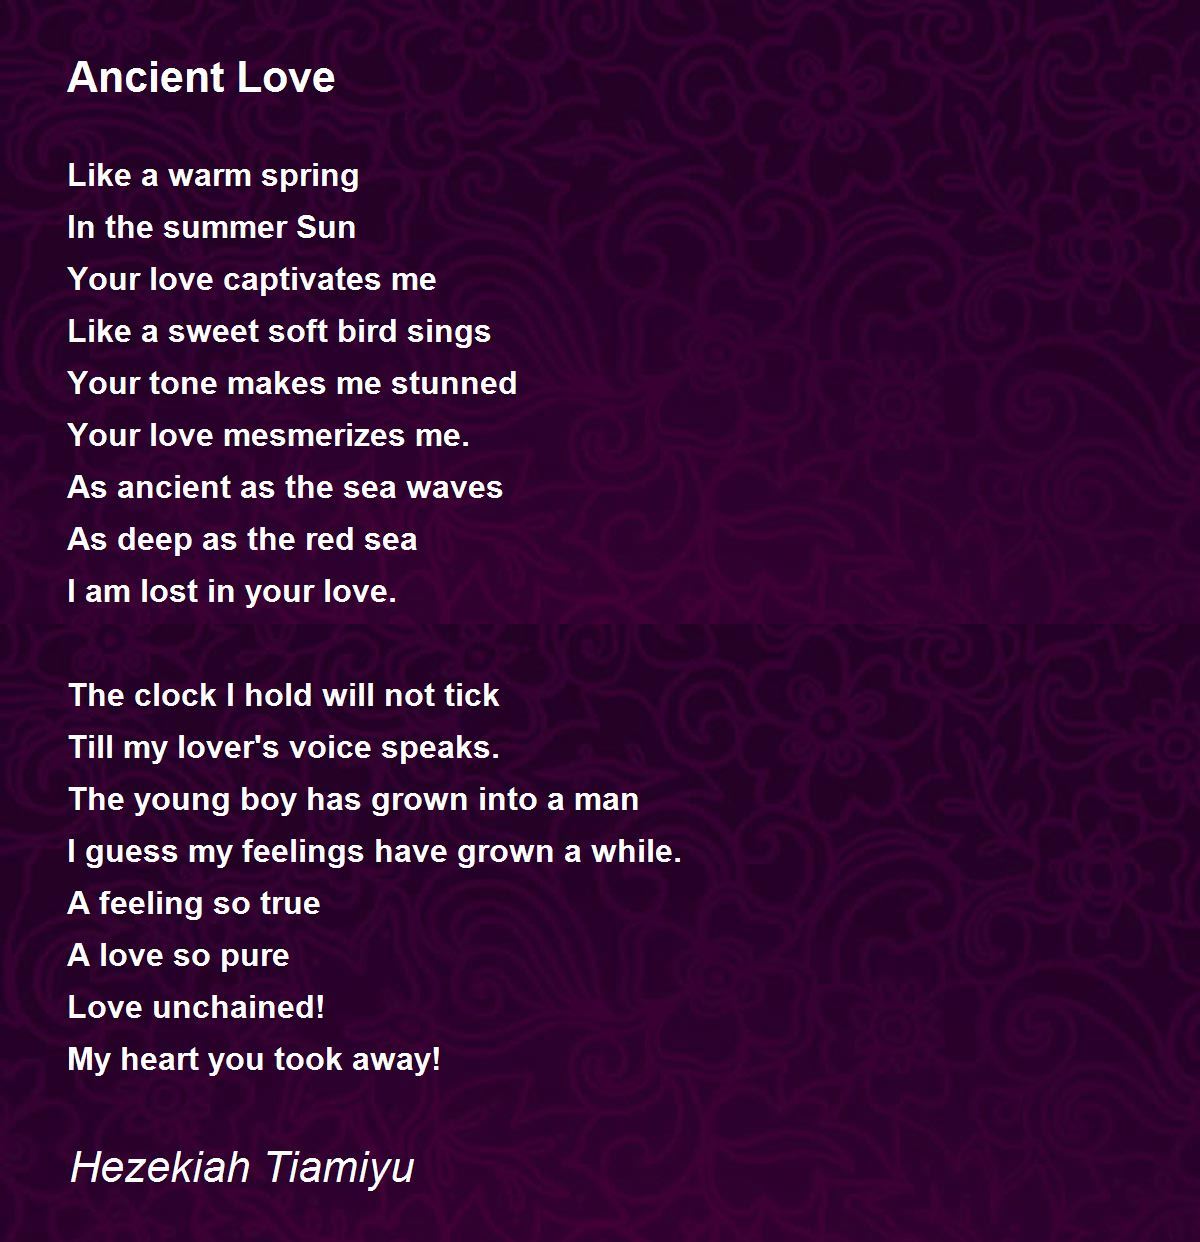 Watch Ancient Love Poetry